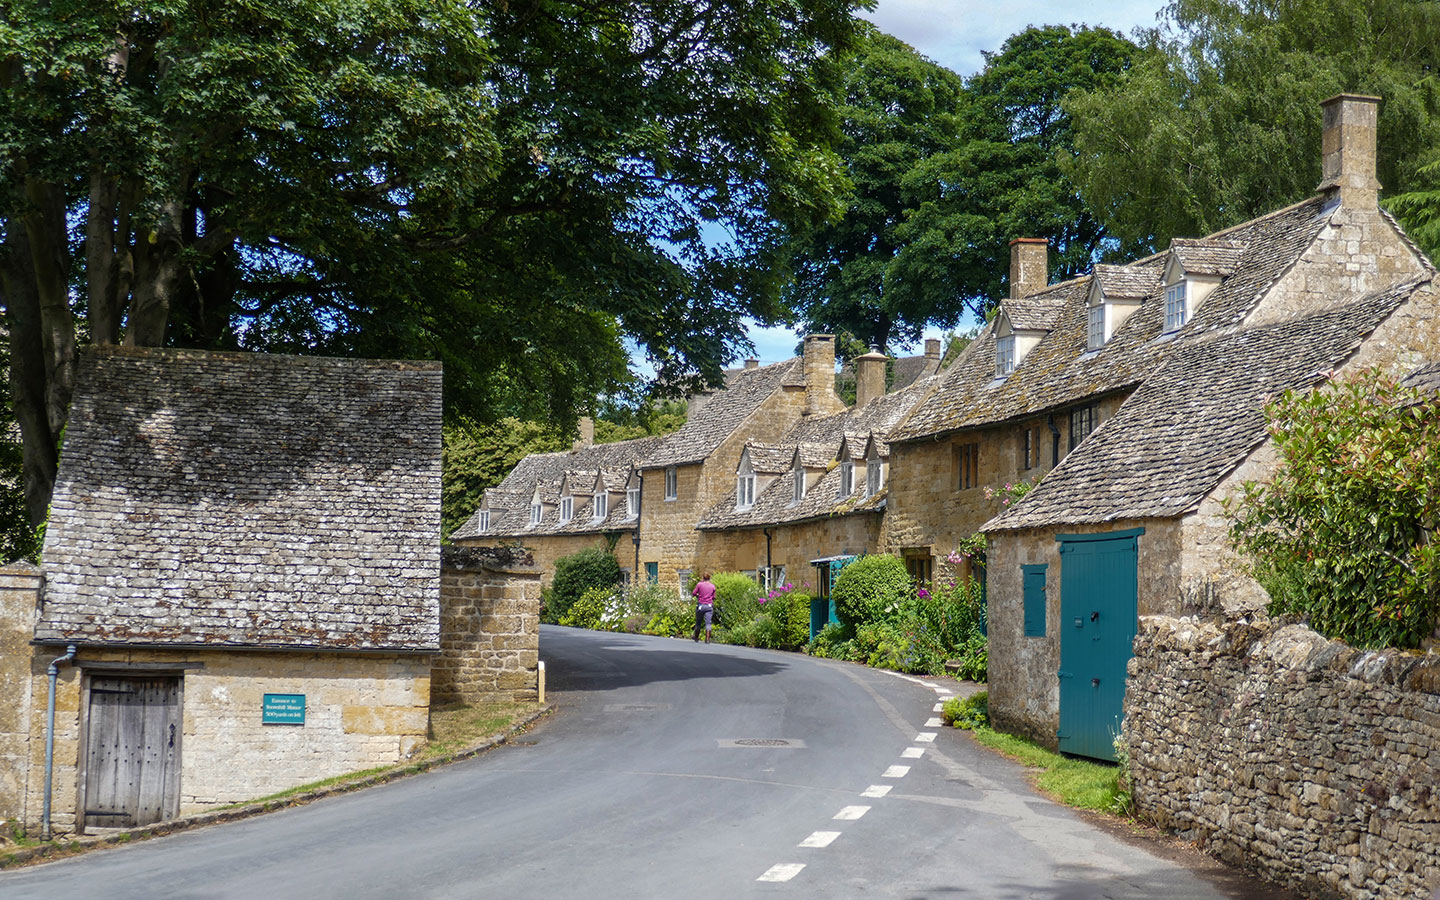 Snowshill village in the Cotswolds